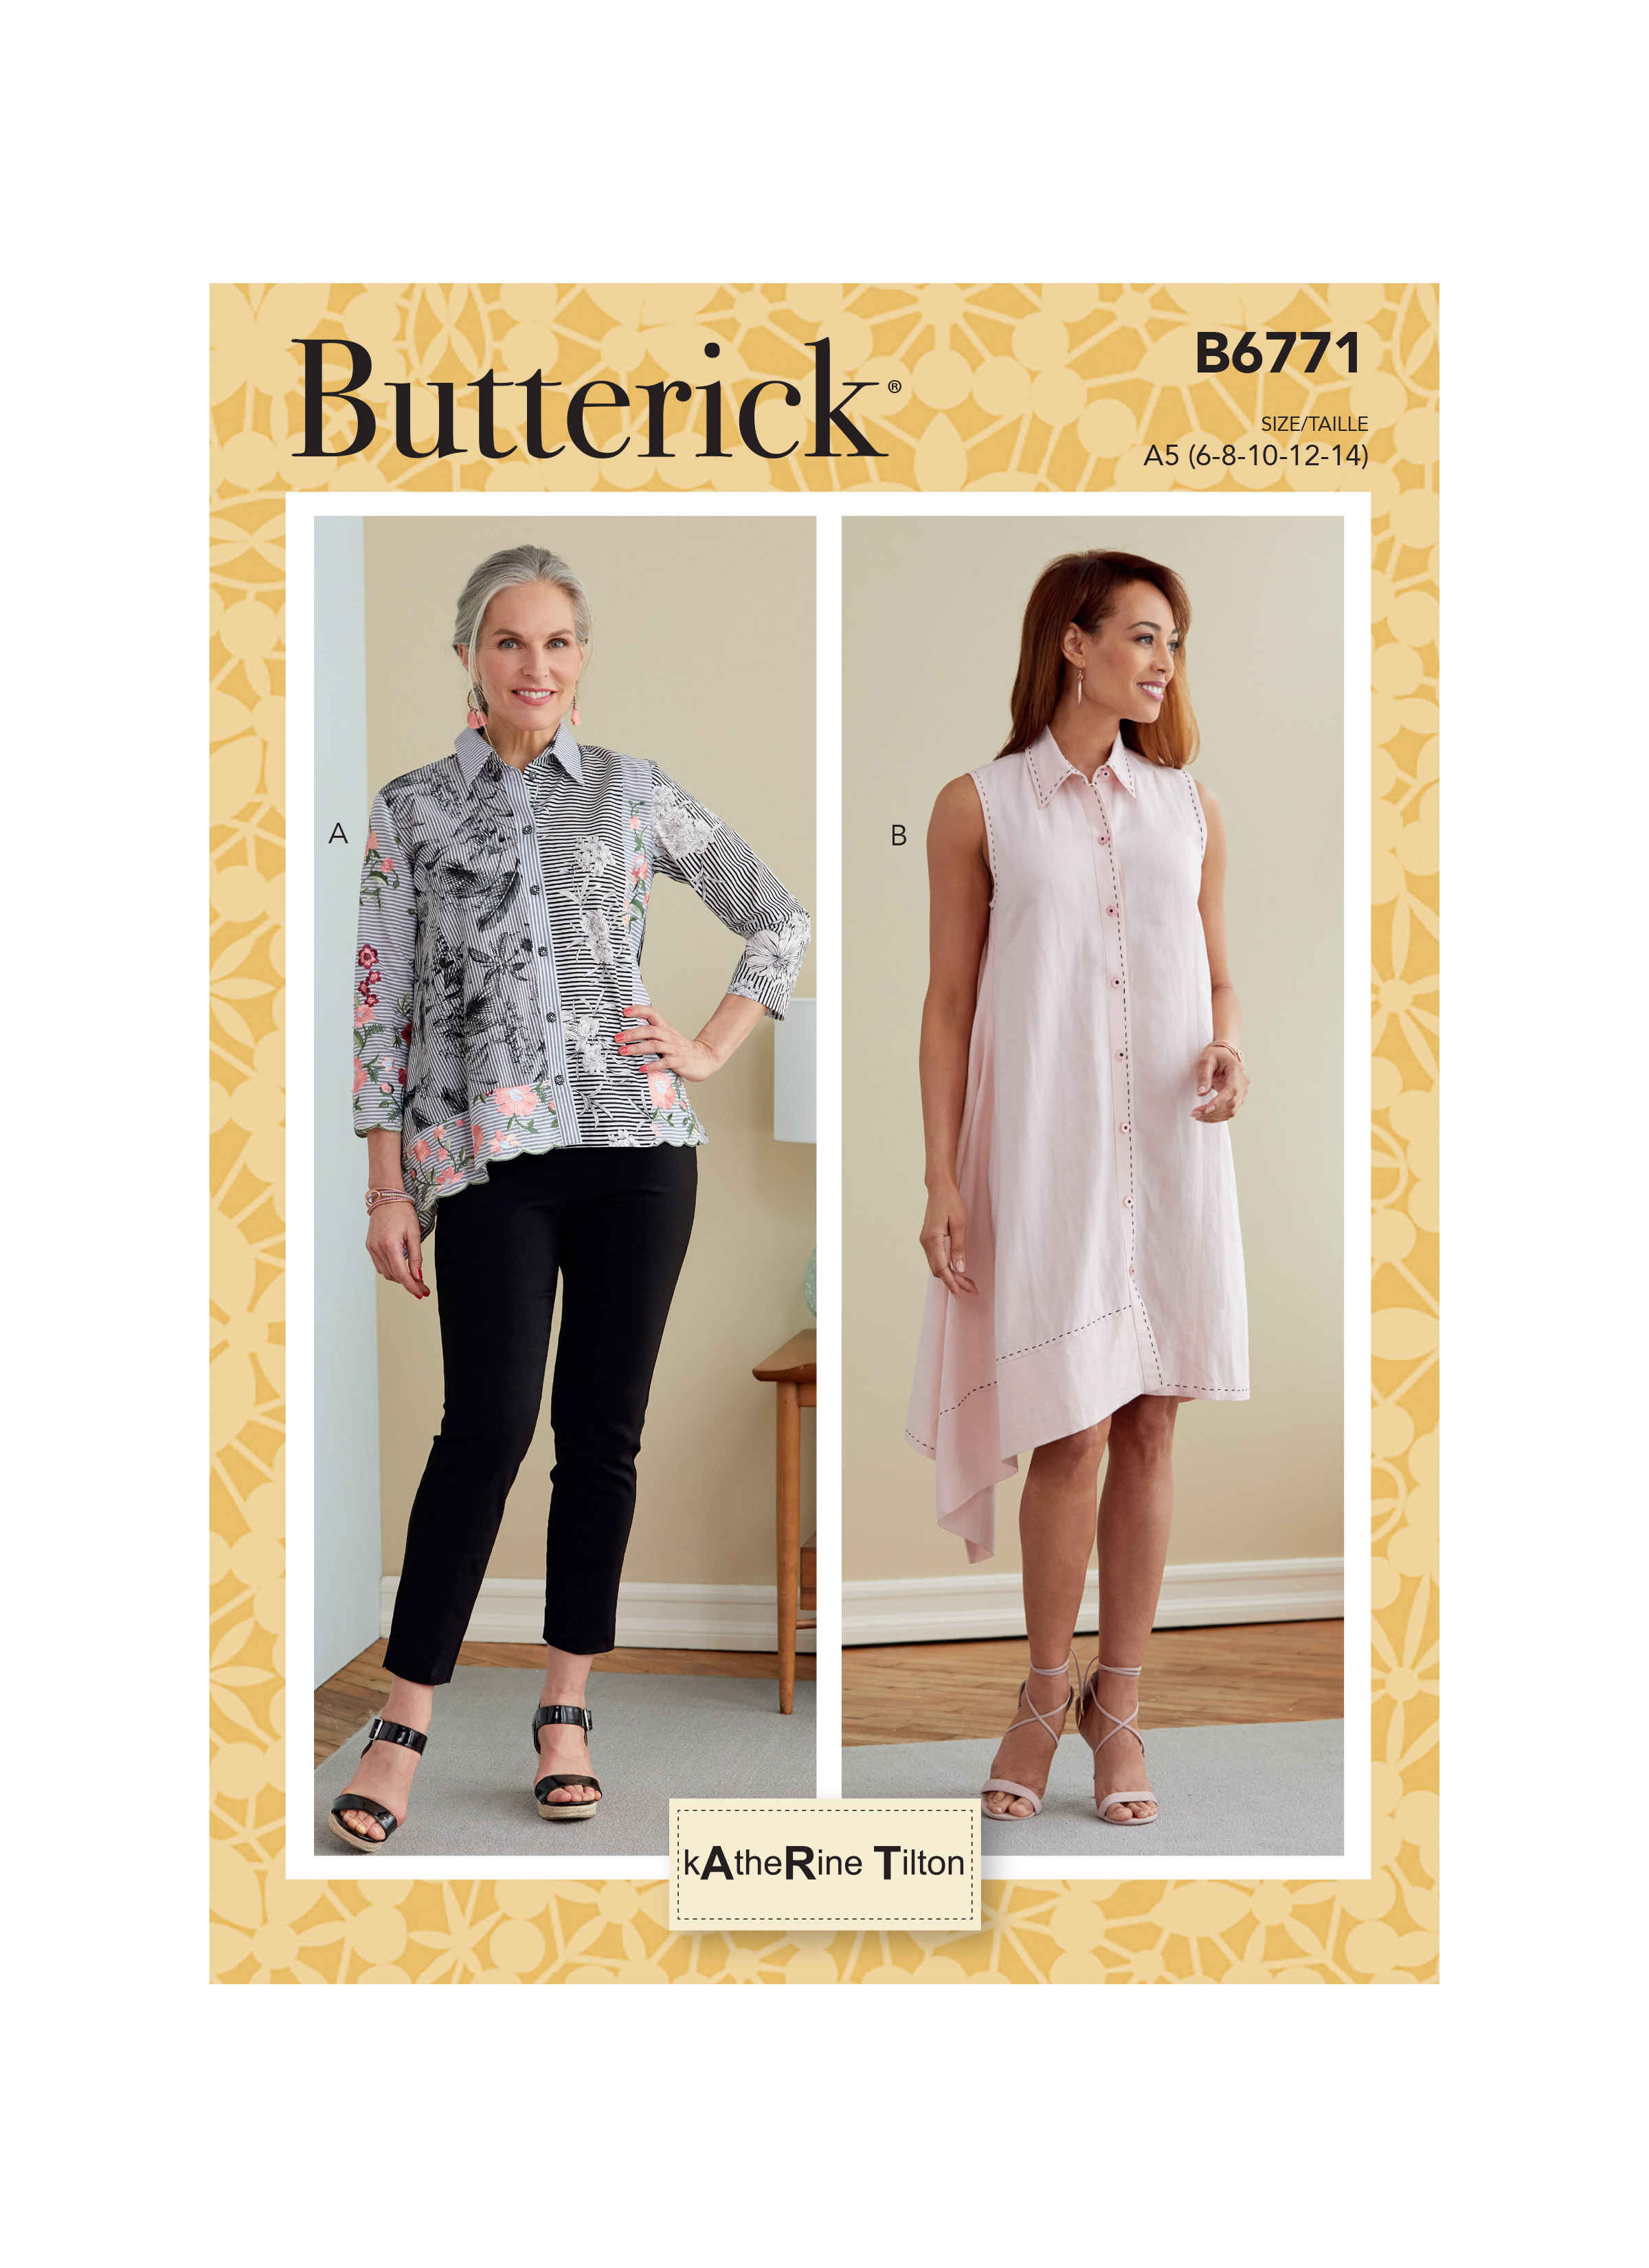 UNCUT and factory folded 2014 Size Xsm-Sml-Med Butterick B6101 Sewing Pattern Misses' Tunic Katherine Tilton